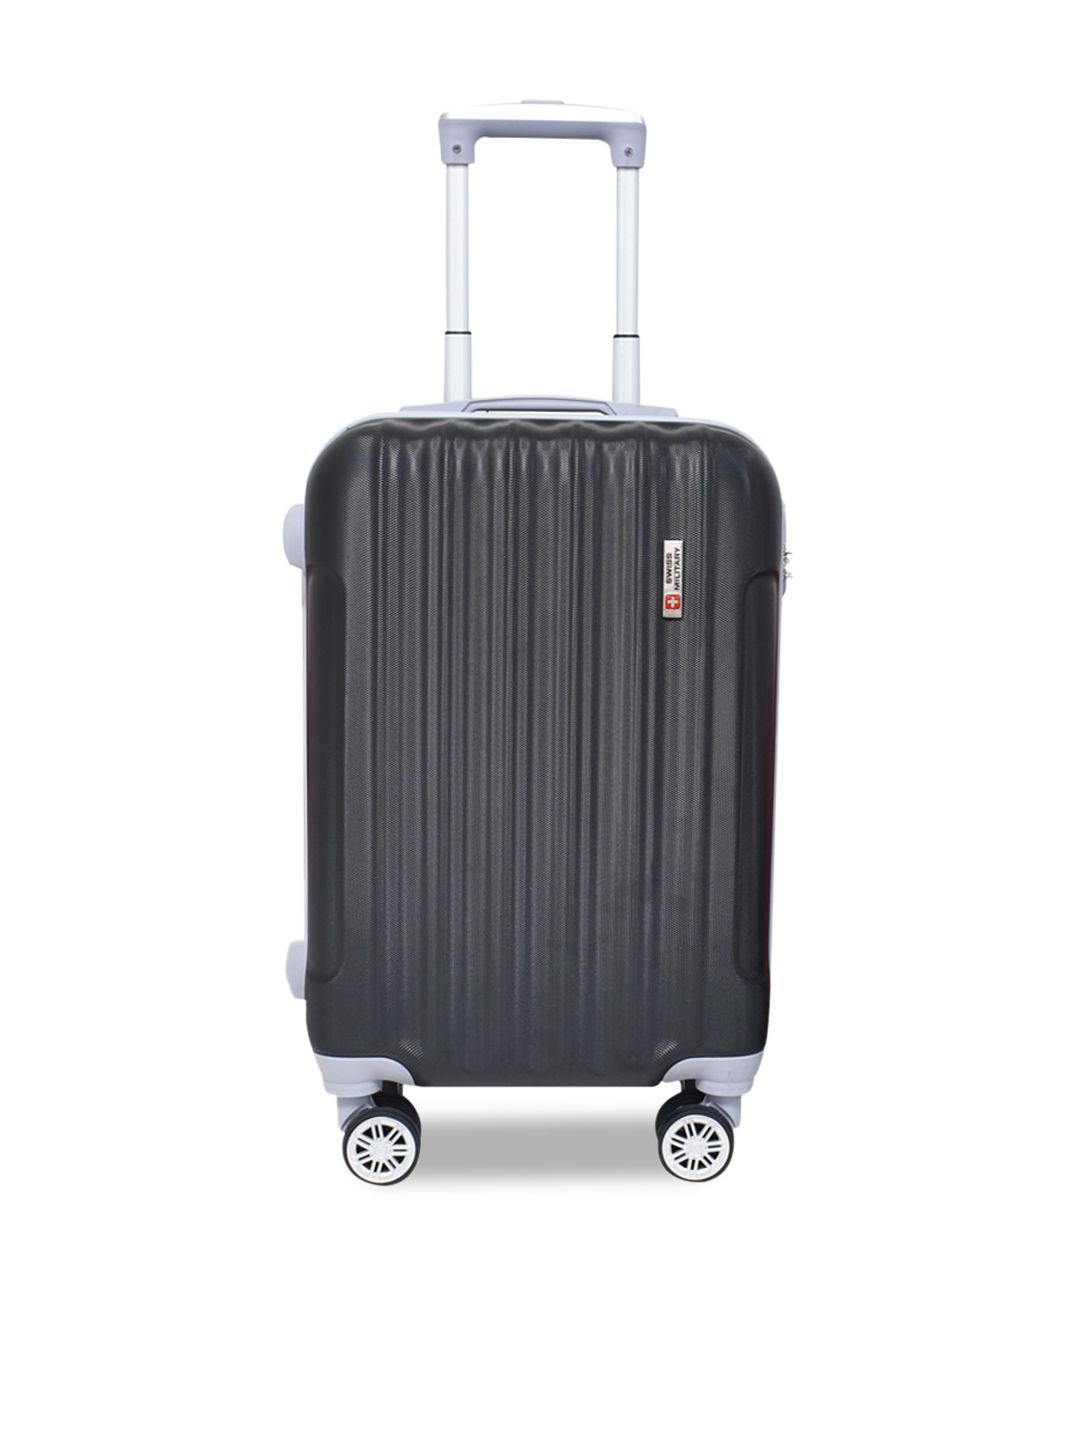 SWISS MILITARY Black Textured Hard-Sided Large Trolley Suitcase Price in India